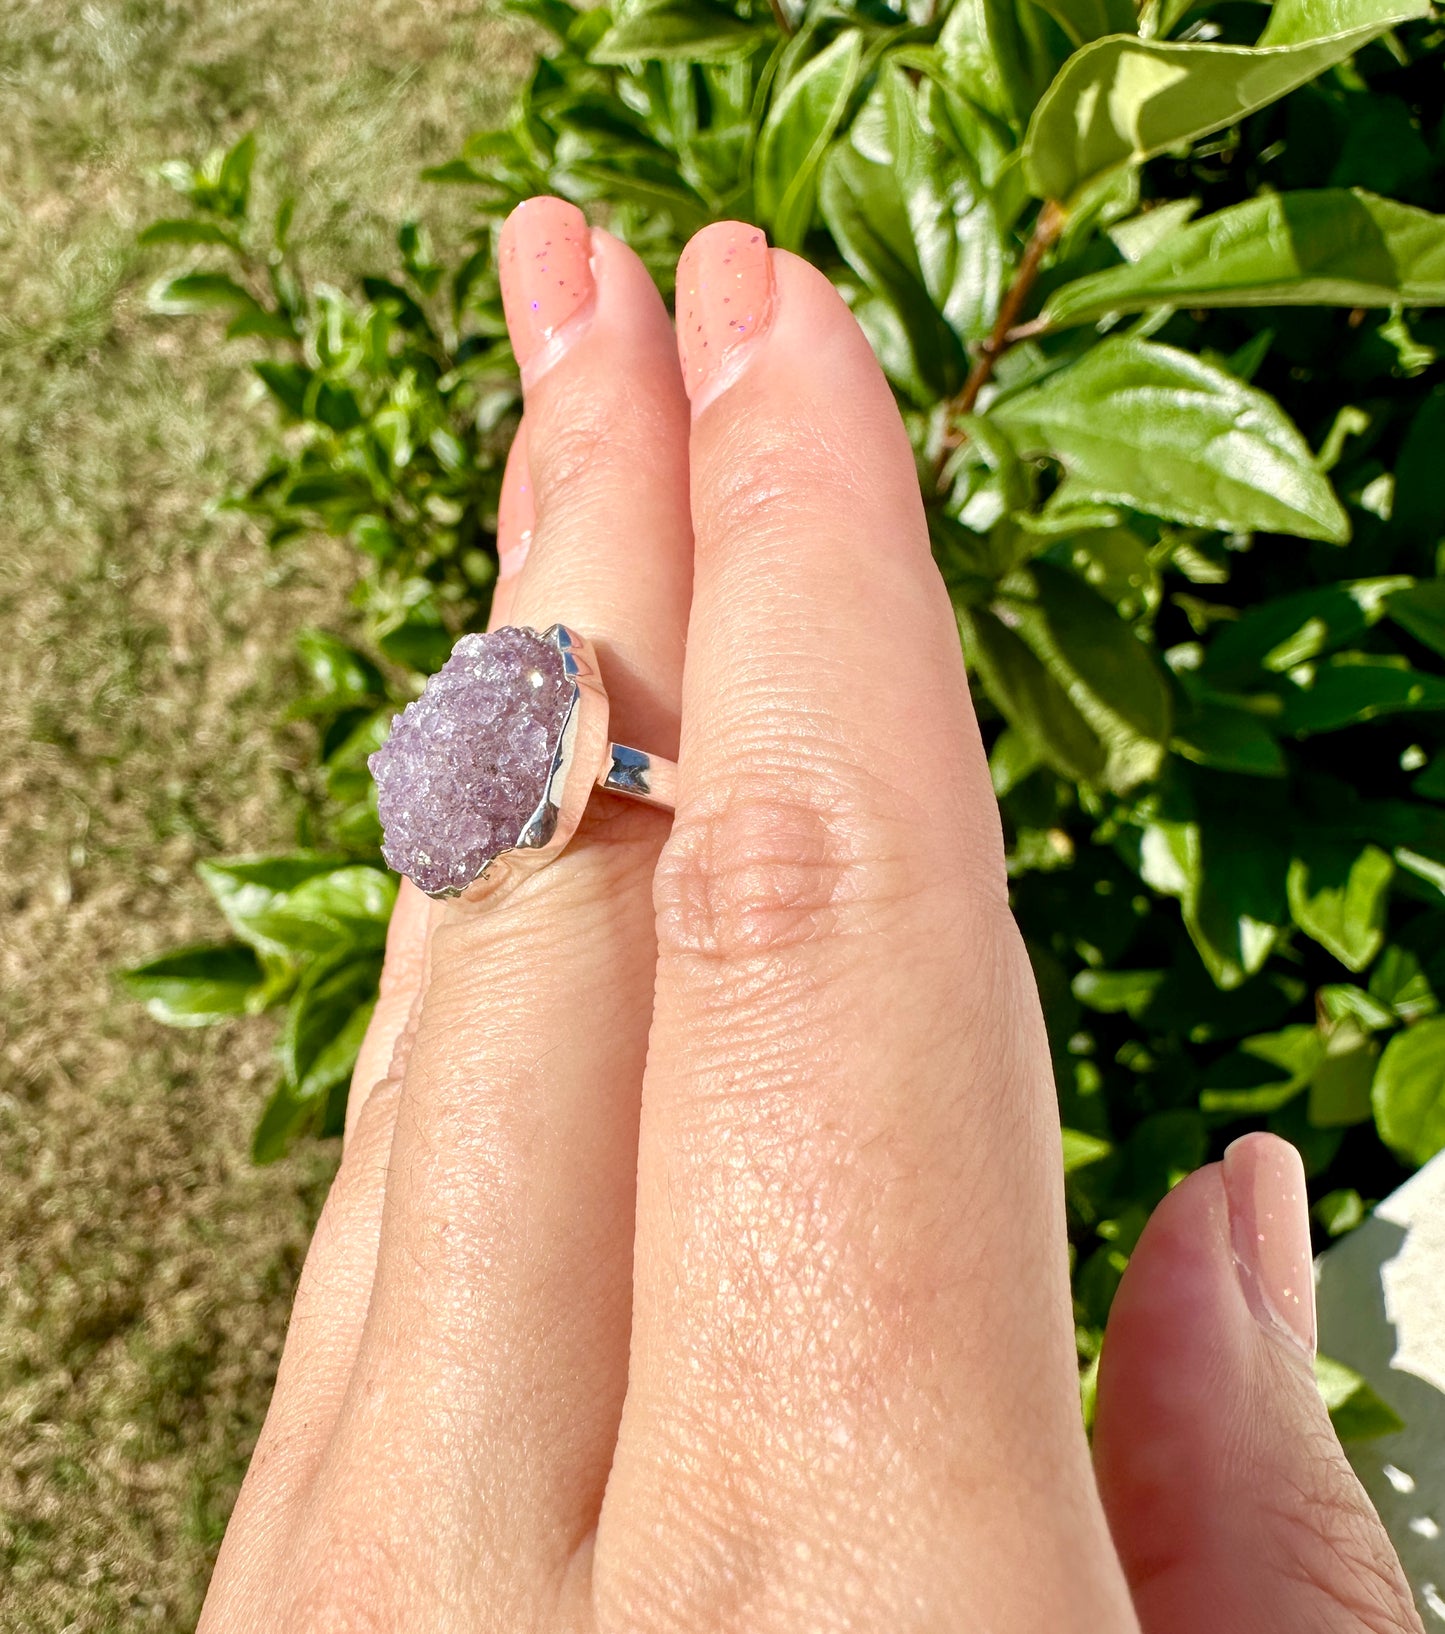 Stunning Amethyst Druzy Sterling Silver Ring - Size 8: Sparkling Natural Crystal, Perfect for Elegance and Healing